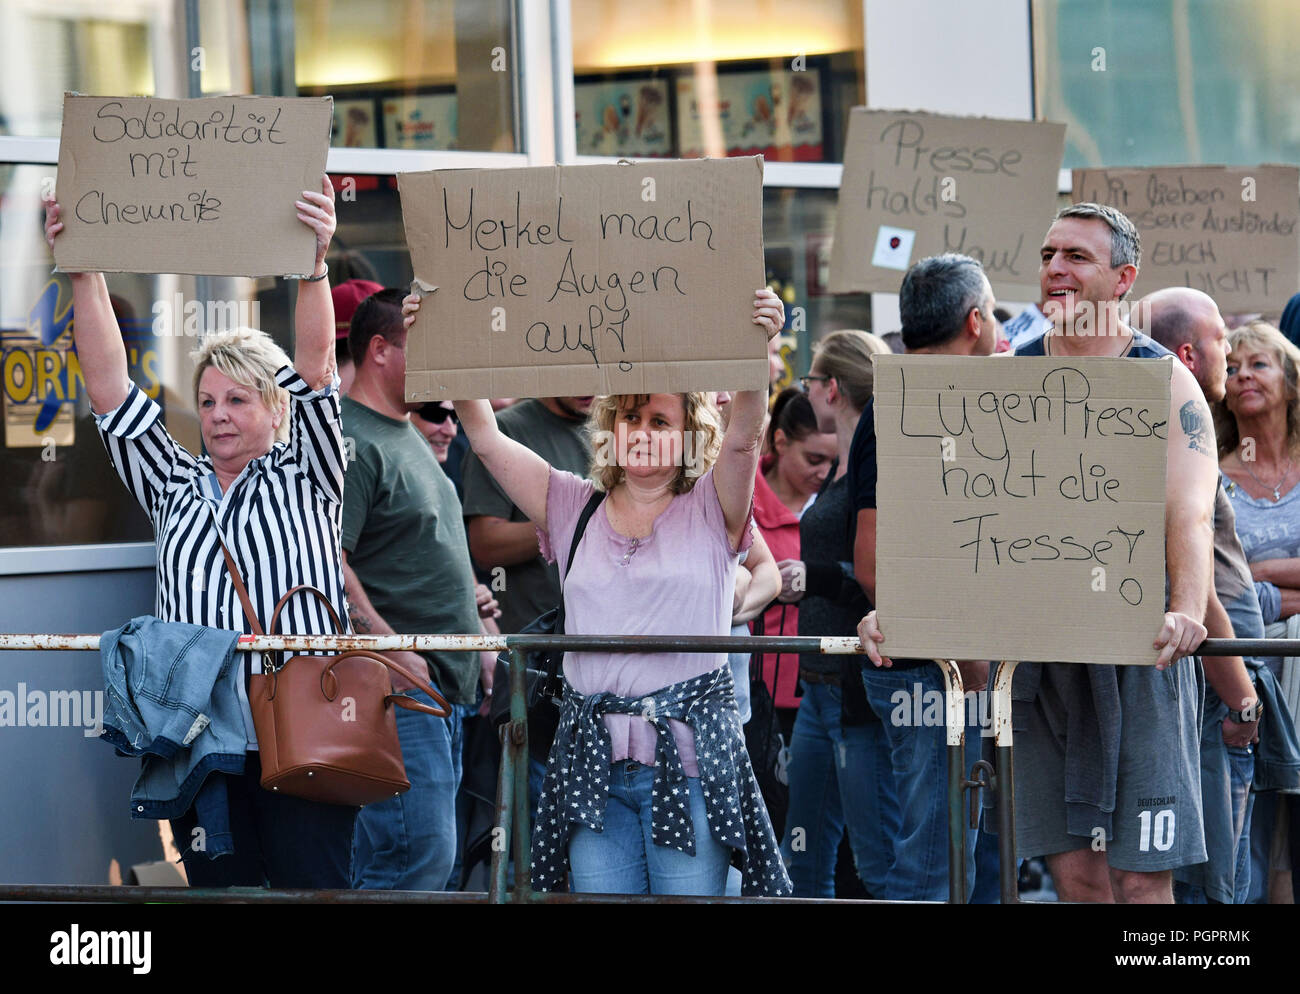 Cologne, Germany. 28th Aug, 2018. Participants in a rally of right-wing groups hold up posters. Left and right groups demonstrate after the events in Chemnitz, where a 35-year-old man was stabbed to death after an argument in the night to Sunday. The posters say: 'Solidarity with Chemnitz', 'Merkel open your eyes' and 'Keep your mouth shut'. Credit: Henning Kaiser/dpa/Alamy Live News Stock Photo